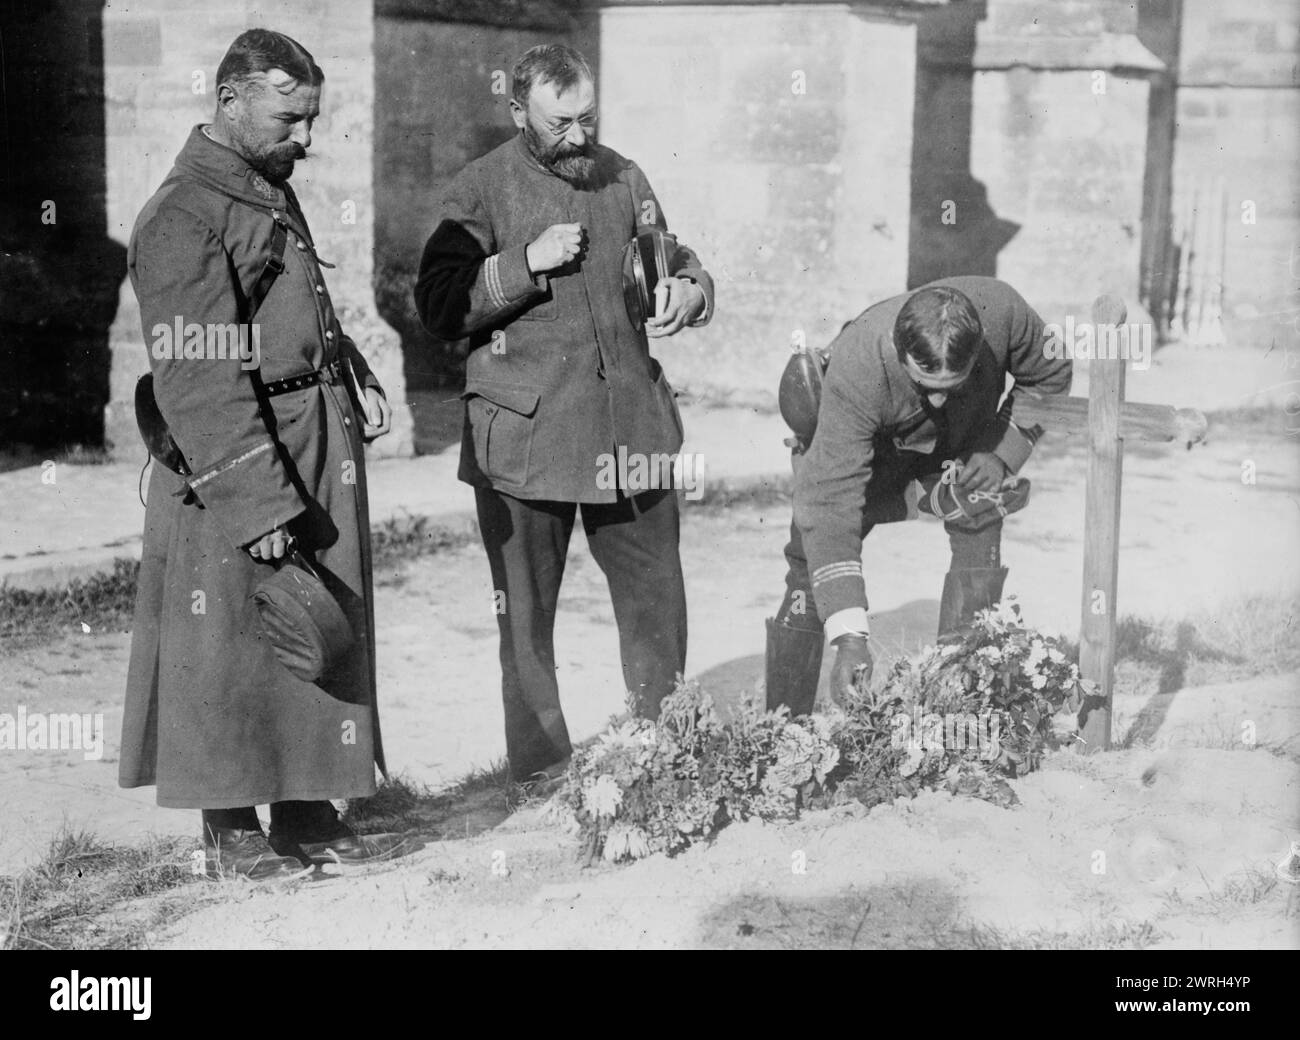 French Officers at graves of comrades, 1914. French officers laying flowers on graves of soldiers during World War I. Stock Photo